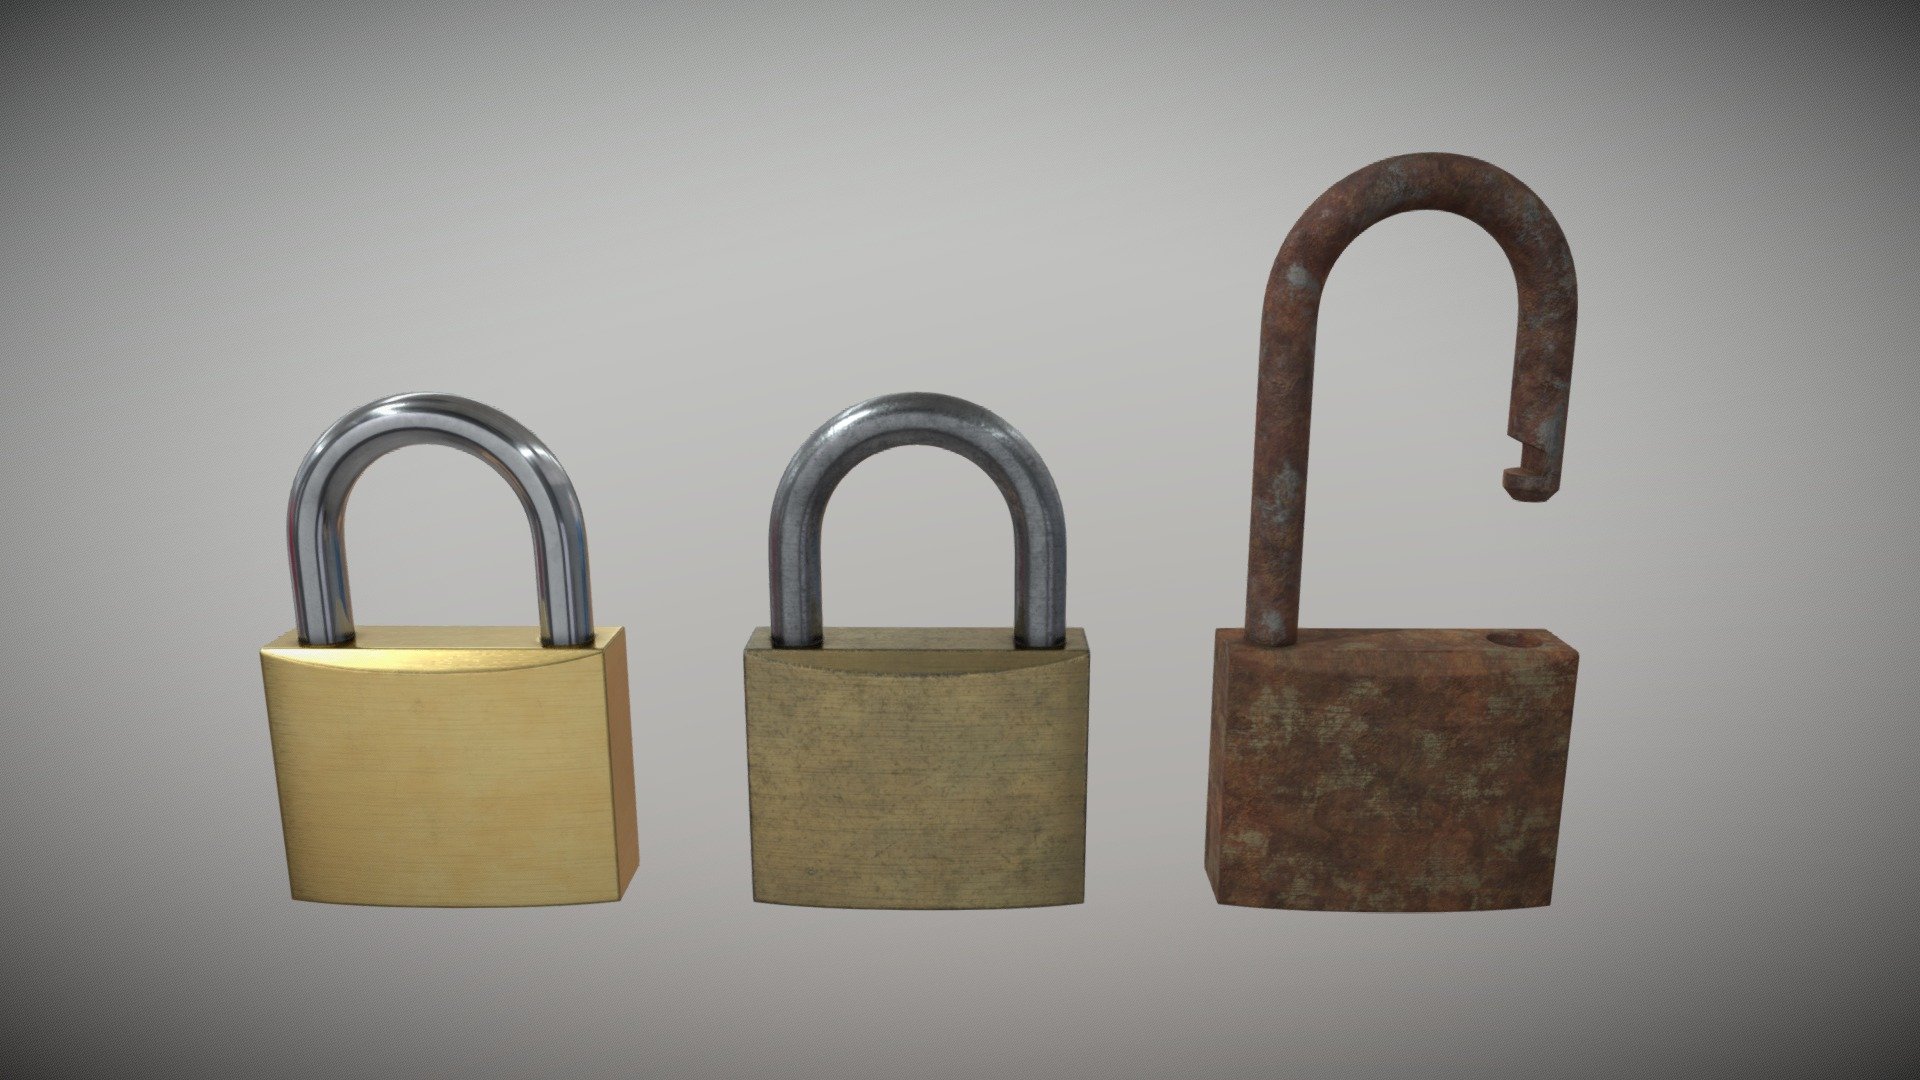 Padlock key: https://skfb.ly/oAv7N

Free key ring: https://skfb.ly/oAuSt

[Zip File]

Mesh Information:




Subdivision-ready model

Subdivision 0: 3744 faces, 7353 tris

Subdivision 1: 14841 faces, 29682 tris

Subdivision 2: 59364 faces, 118728 tris

World scale (cm): 7.65 height x 5 x 1.64

UV unwrapped

Texture Information:




Three types of texture: New, Used, Old

Texture size: 2048x2048

BaseColor

Roughness

Metallic

Normal OpenGL and DirectX

PNG format

Formats include: 




.obj

.fbx

.blend

~ If you have questions or problems, please feel free to contact me 3d model